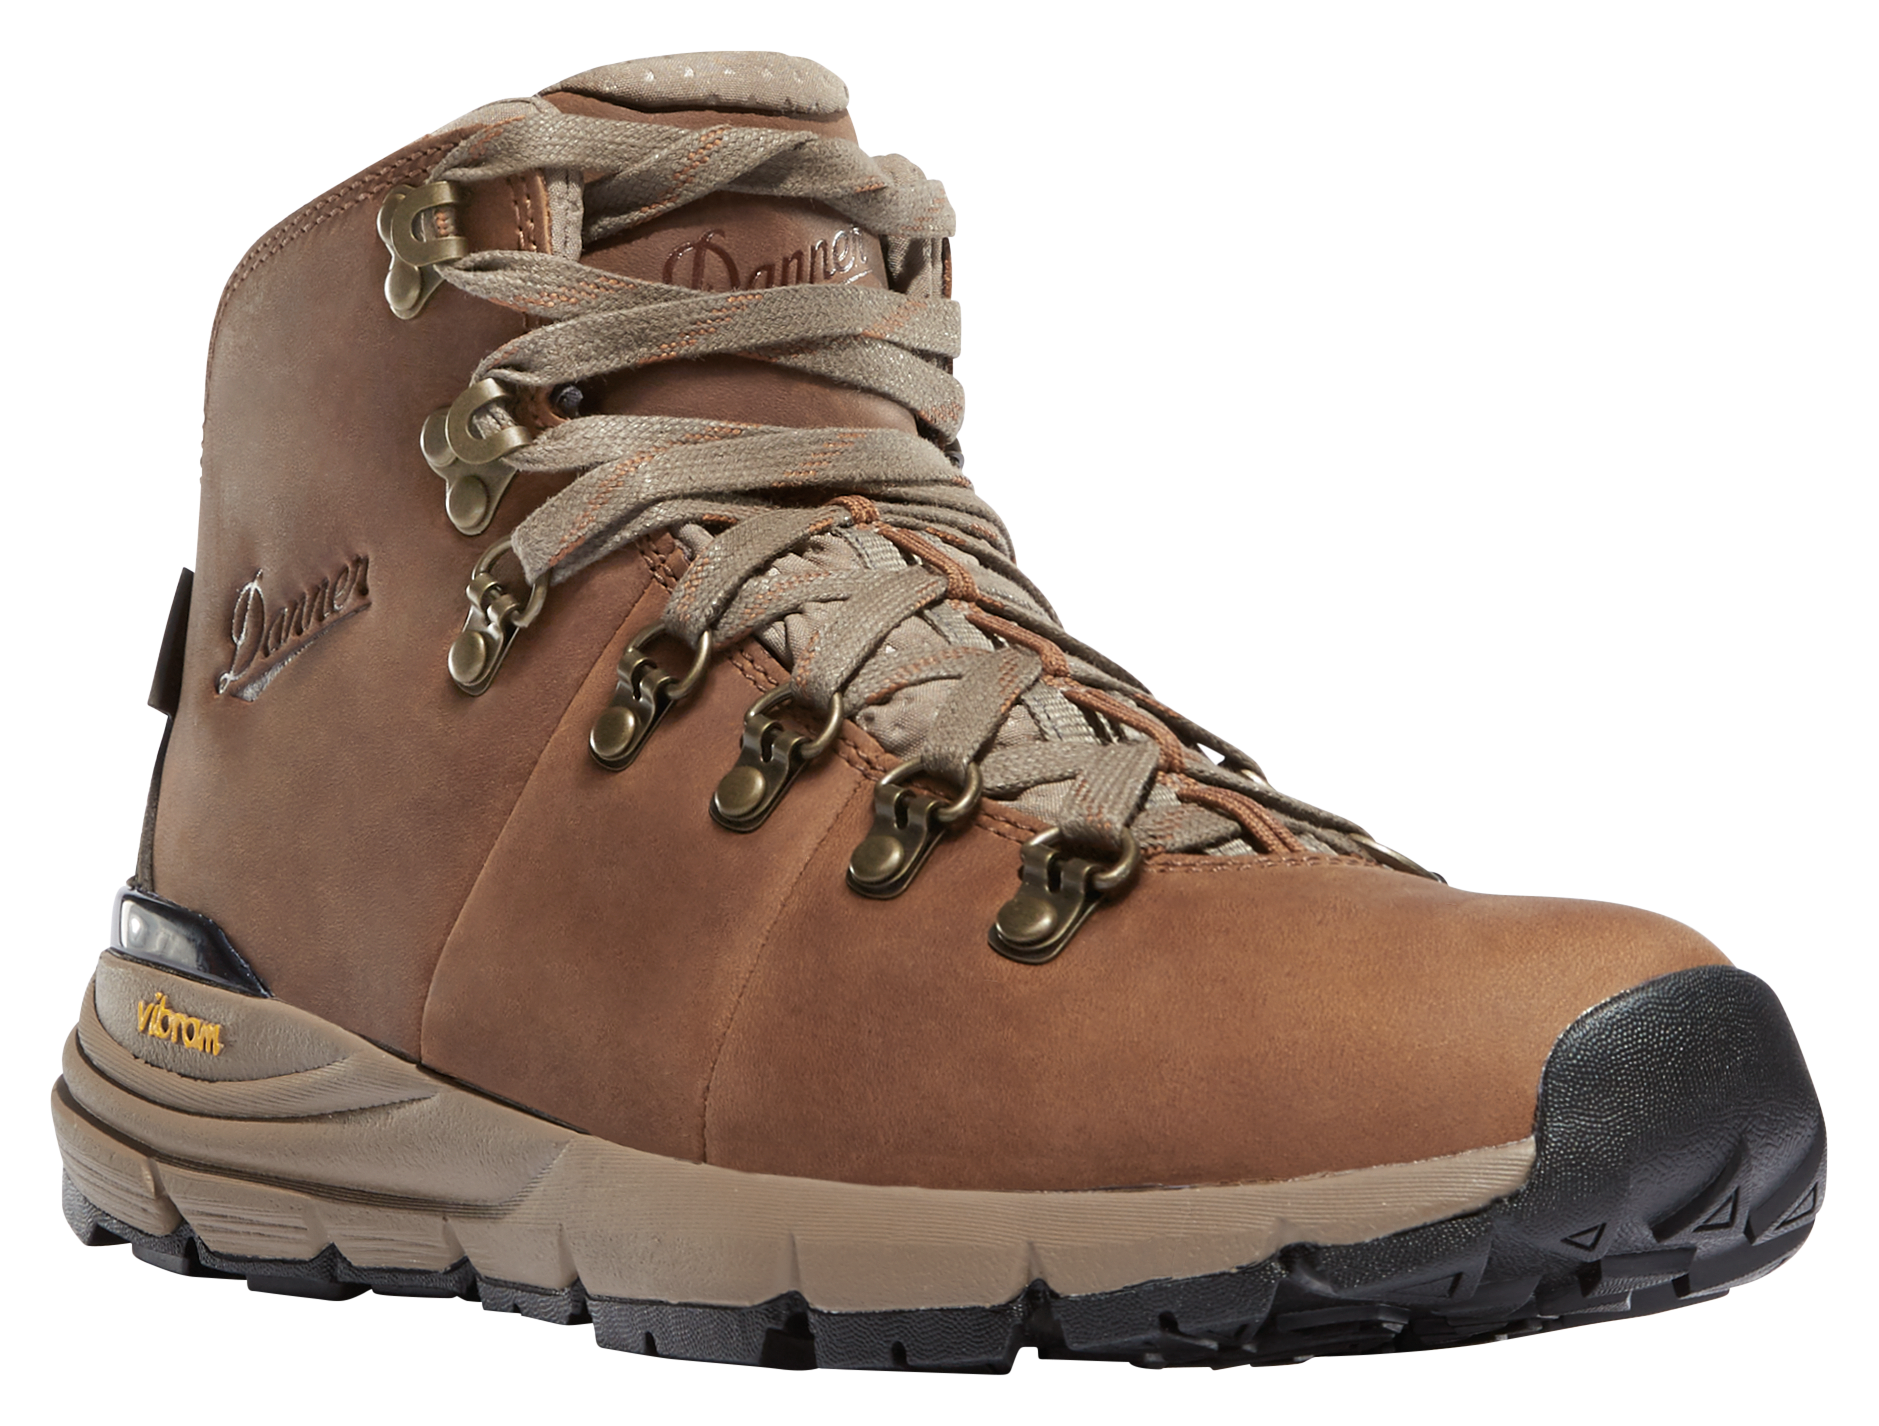 Danner Mountain 600 Leather Waterproof Hiking Boots for Ladies - Rich Brown - 5.5M